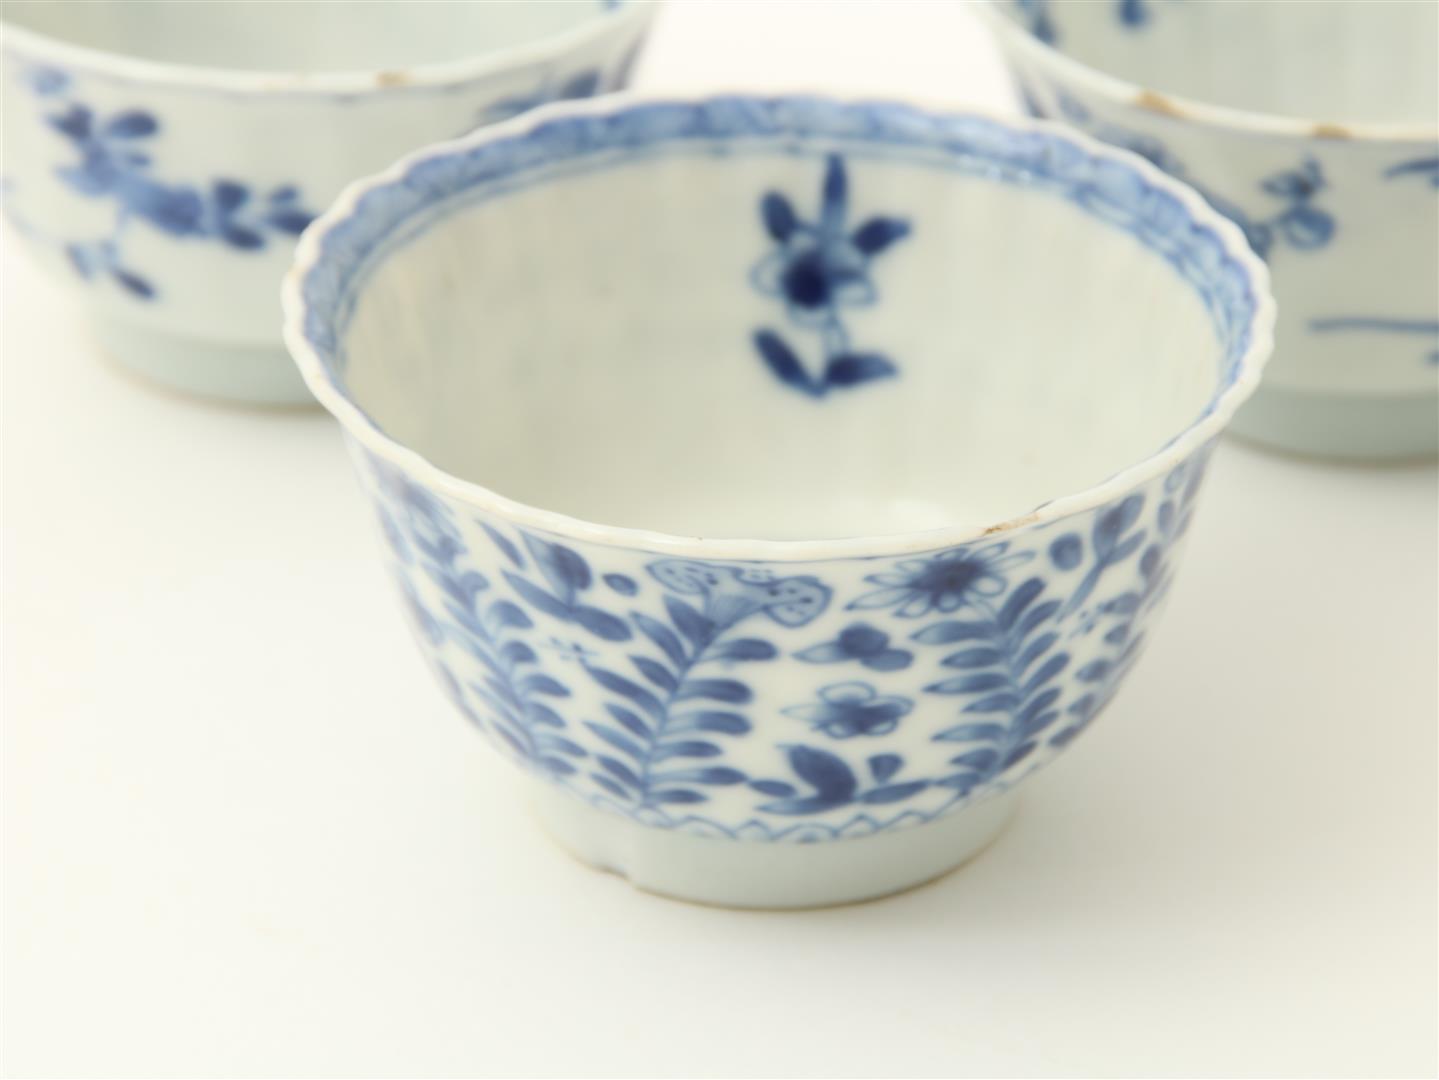 Series of 3 porcelain Kangxi cups with flower decoration and marked with Lozenge mark, including 5 - Image 3 of 6